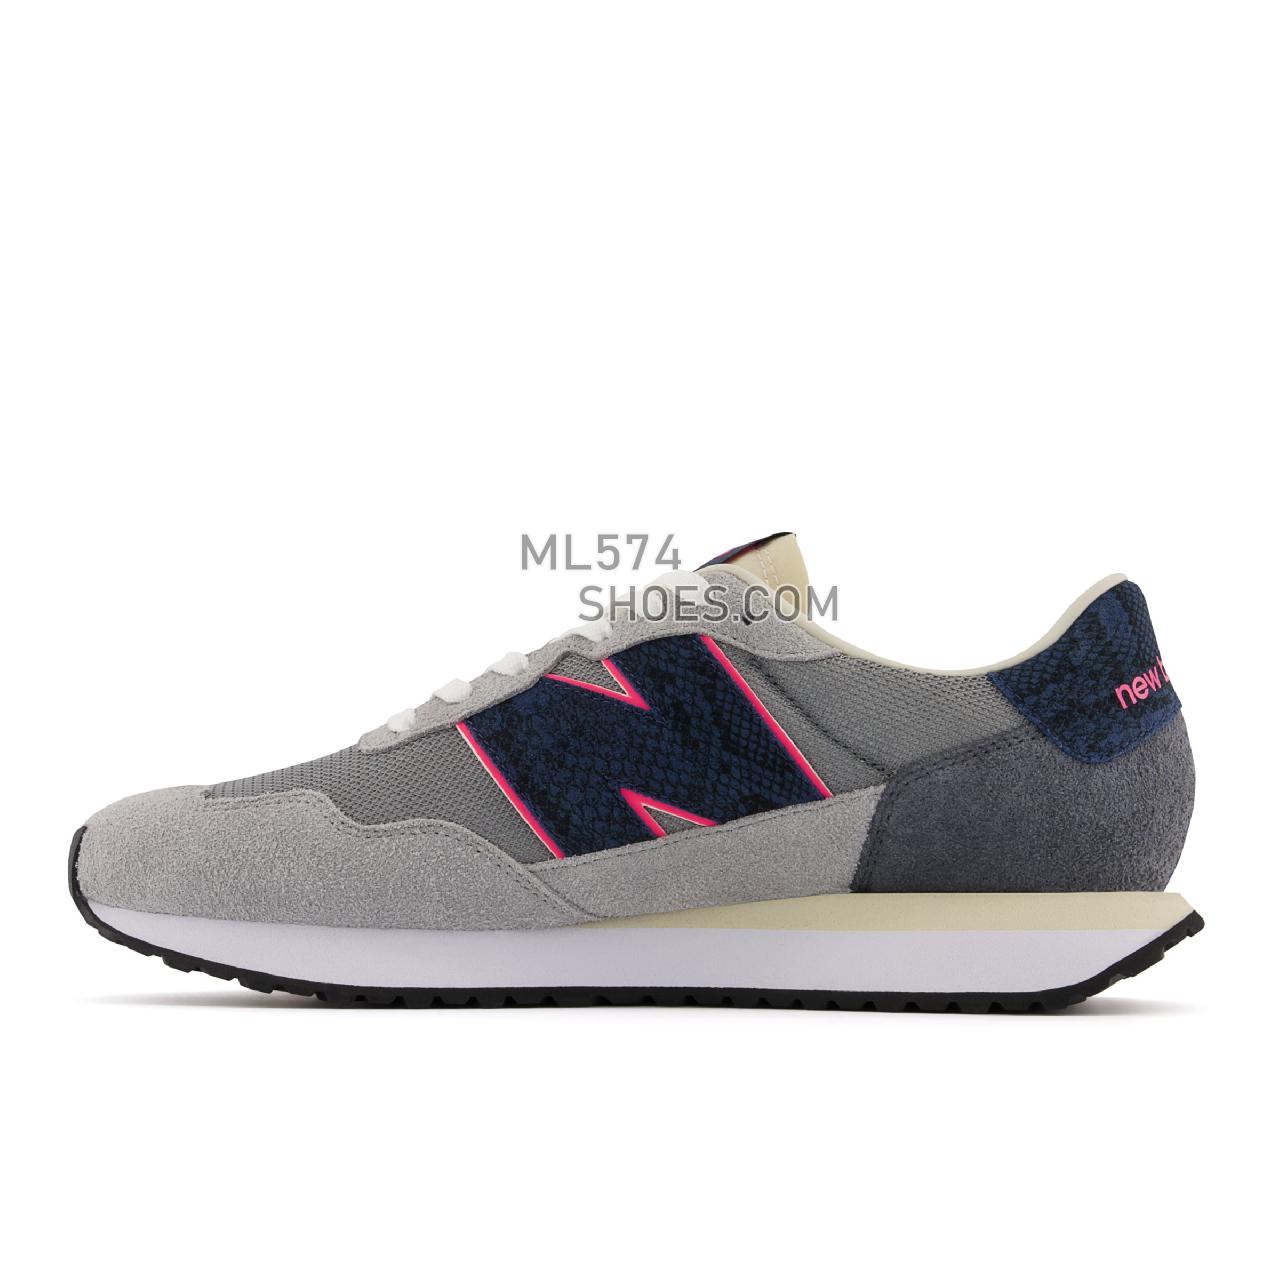 New Balance SNS 237 - Men's Classic Sneakers - Navy with Grey - MS237NS